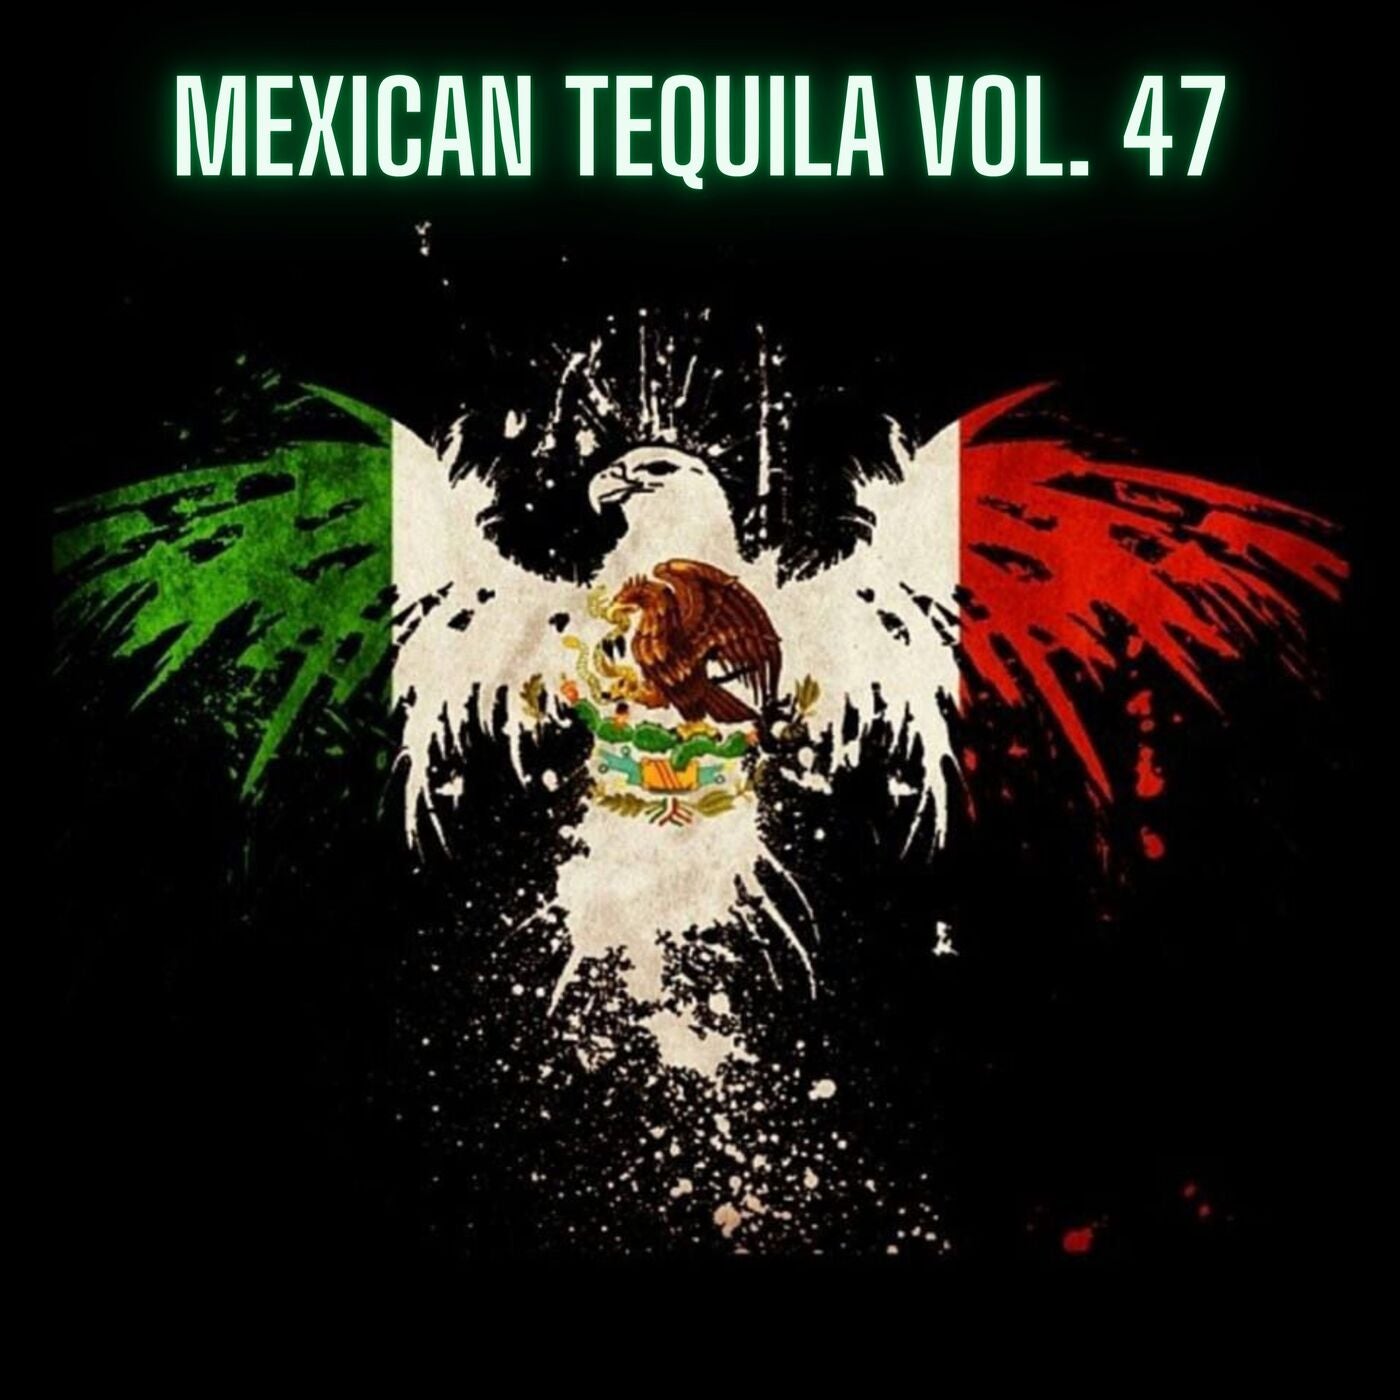 Mexican Tequila Vol. 47